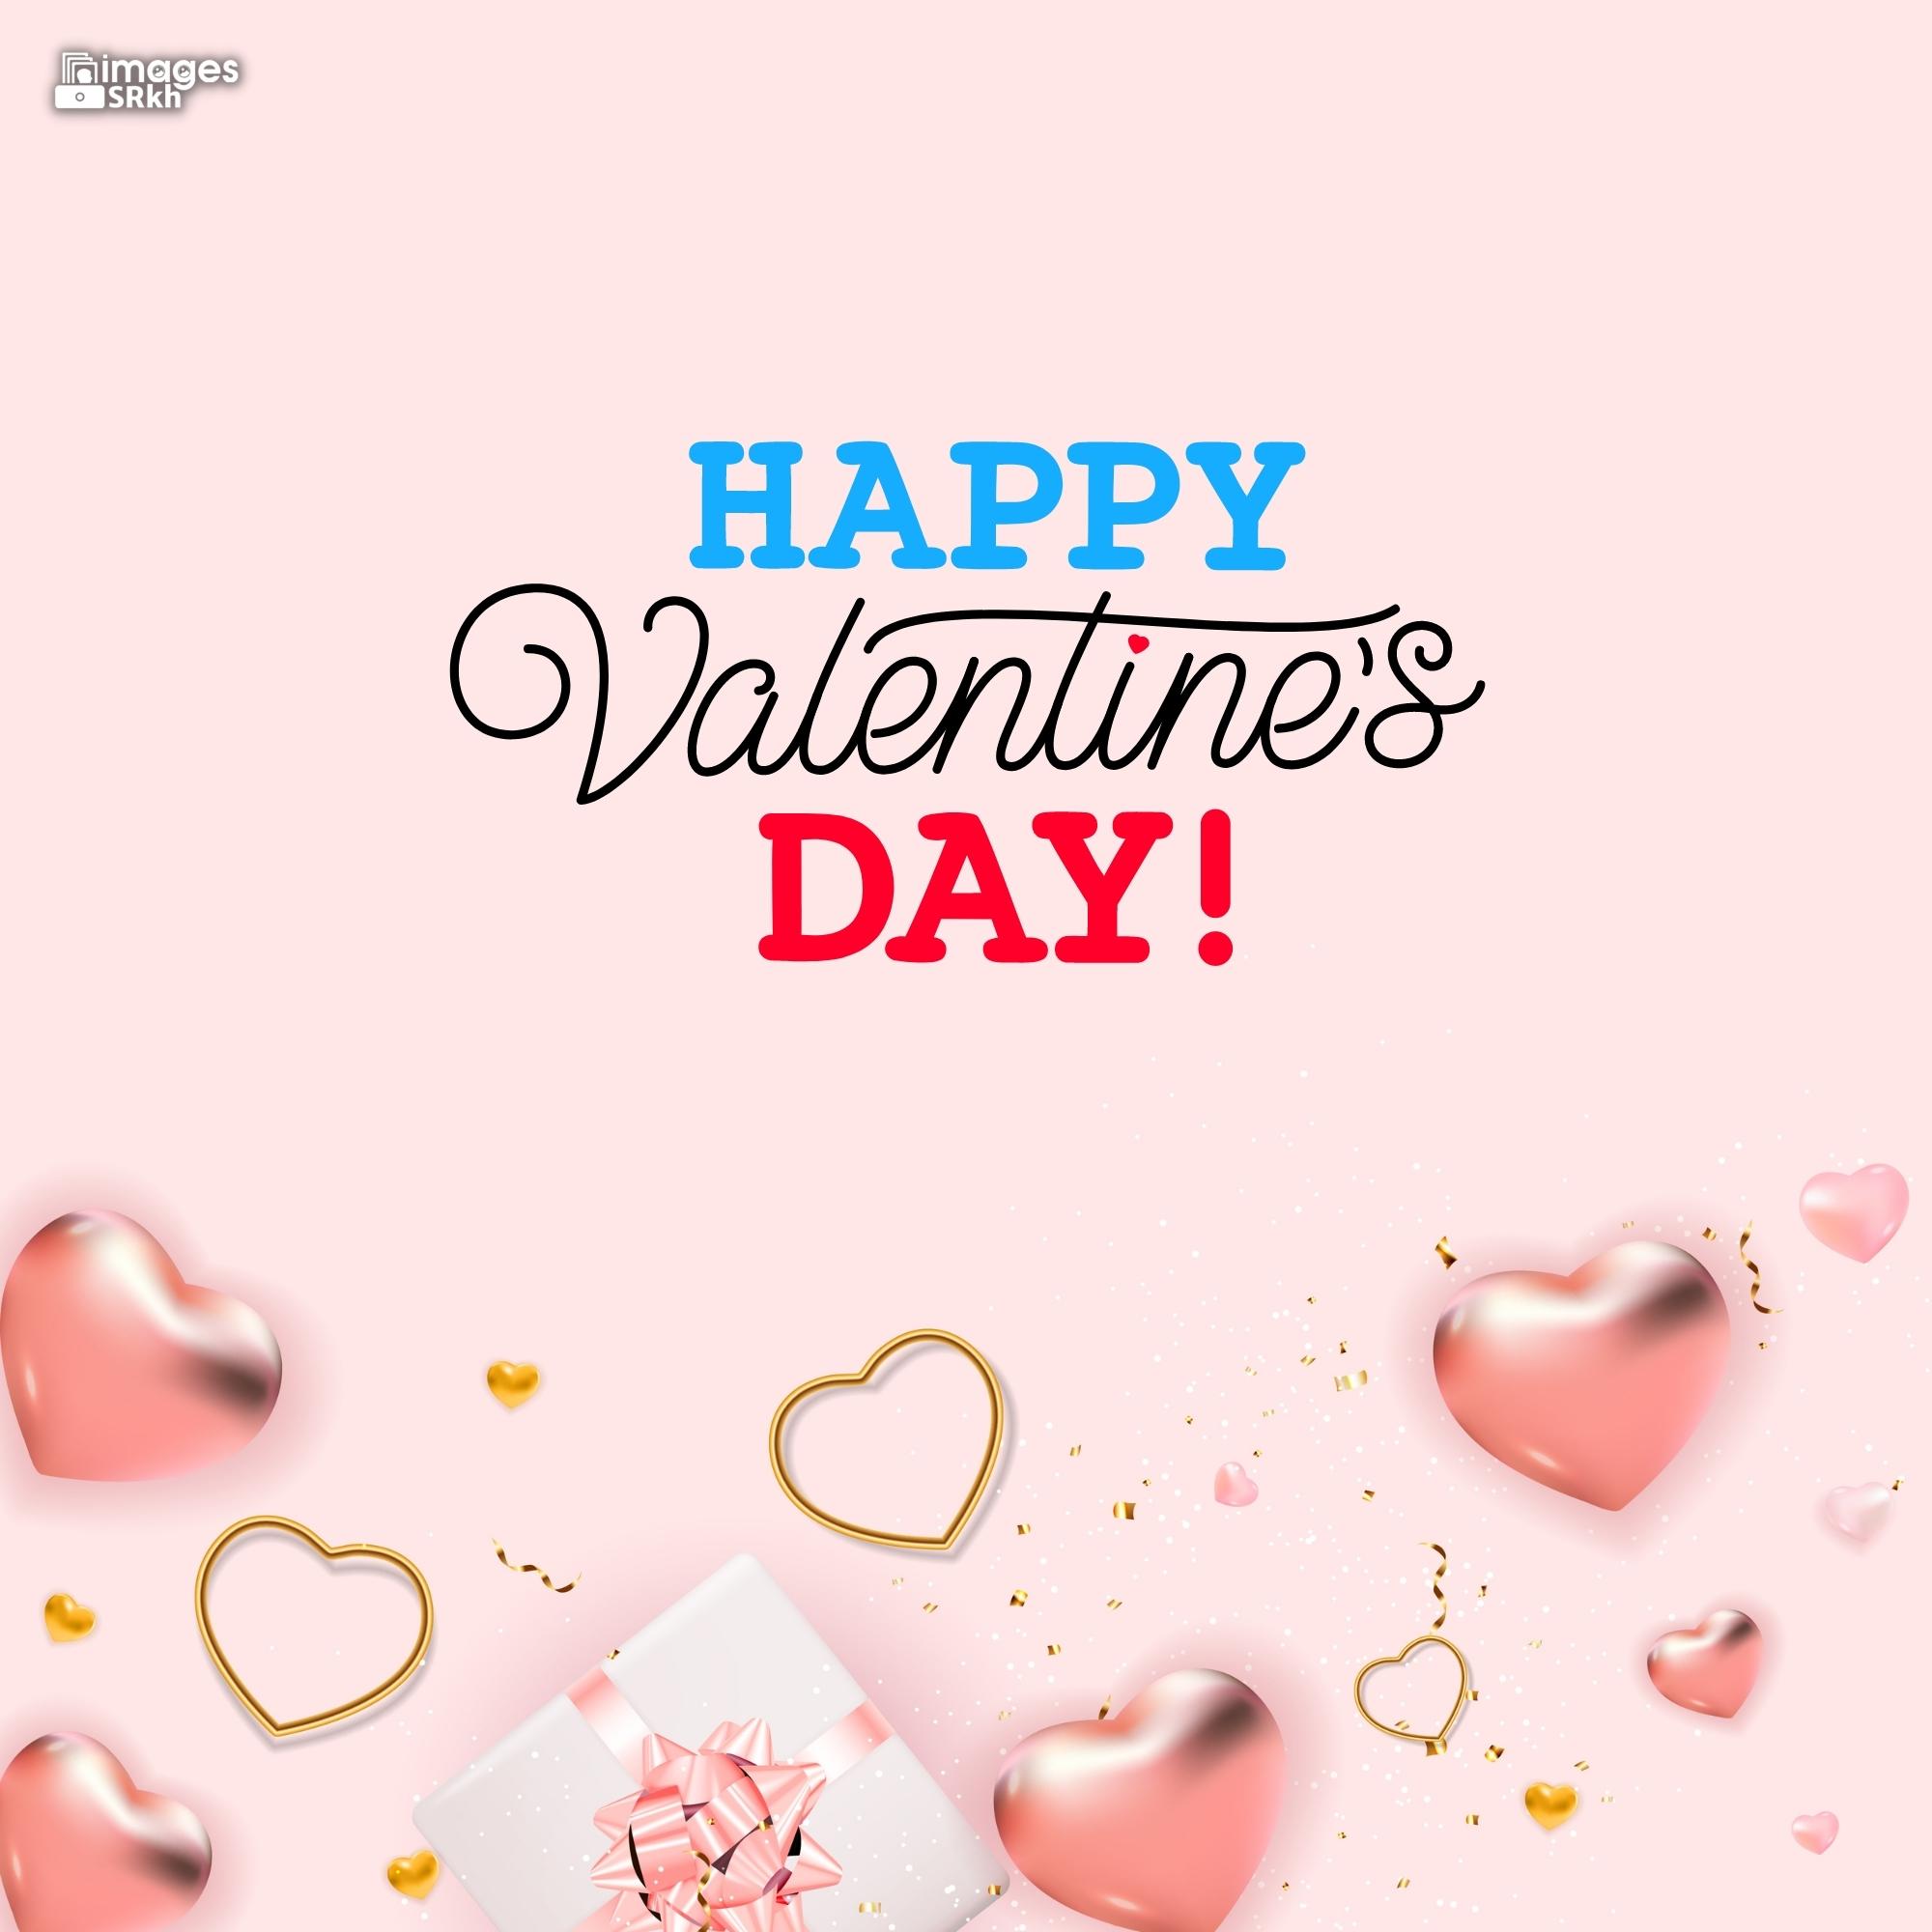 Happy Valentines Day | 489 | PREMIUM IMAGES | Wishes for Love